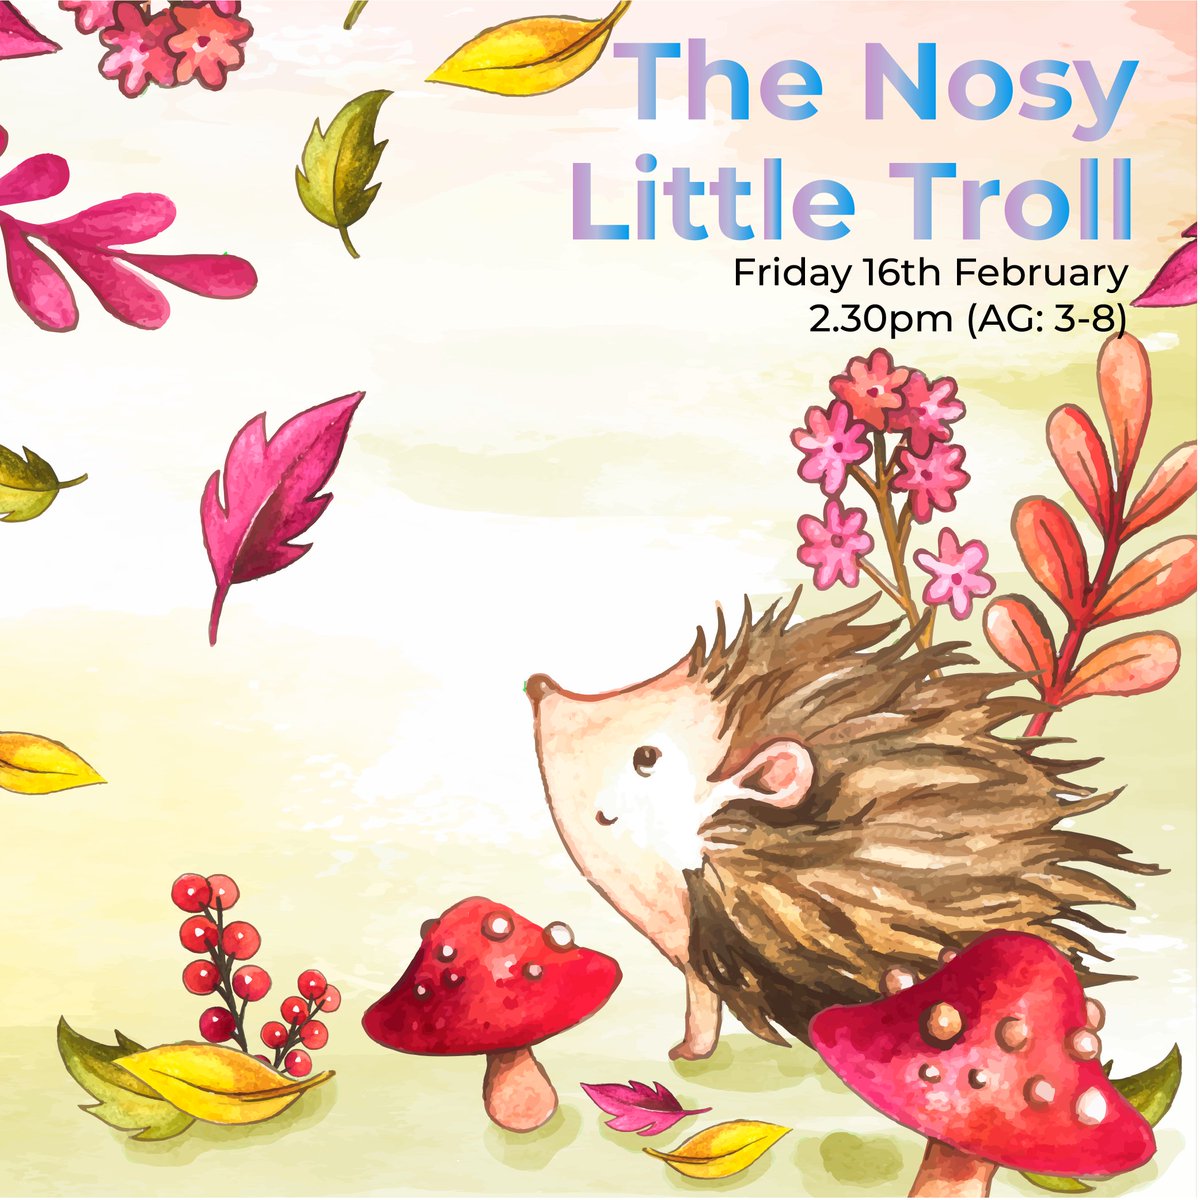 Venture down to the Enchanted Forest! Craft and sculpt your very own masks and trinkets to bring to our children's performance, The Nosy Little Troll! Whimsical Felt masks, Painted Fairy Houses, The Nosy Little Troll, Book now at: ruralarts.org/whats-on/